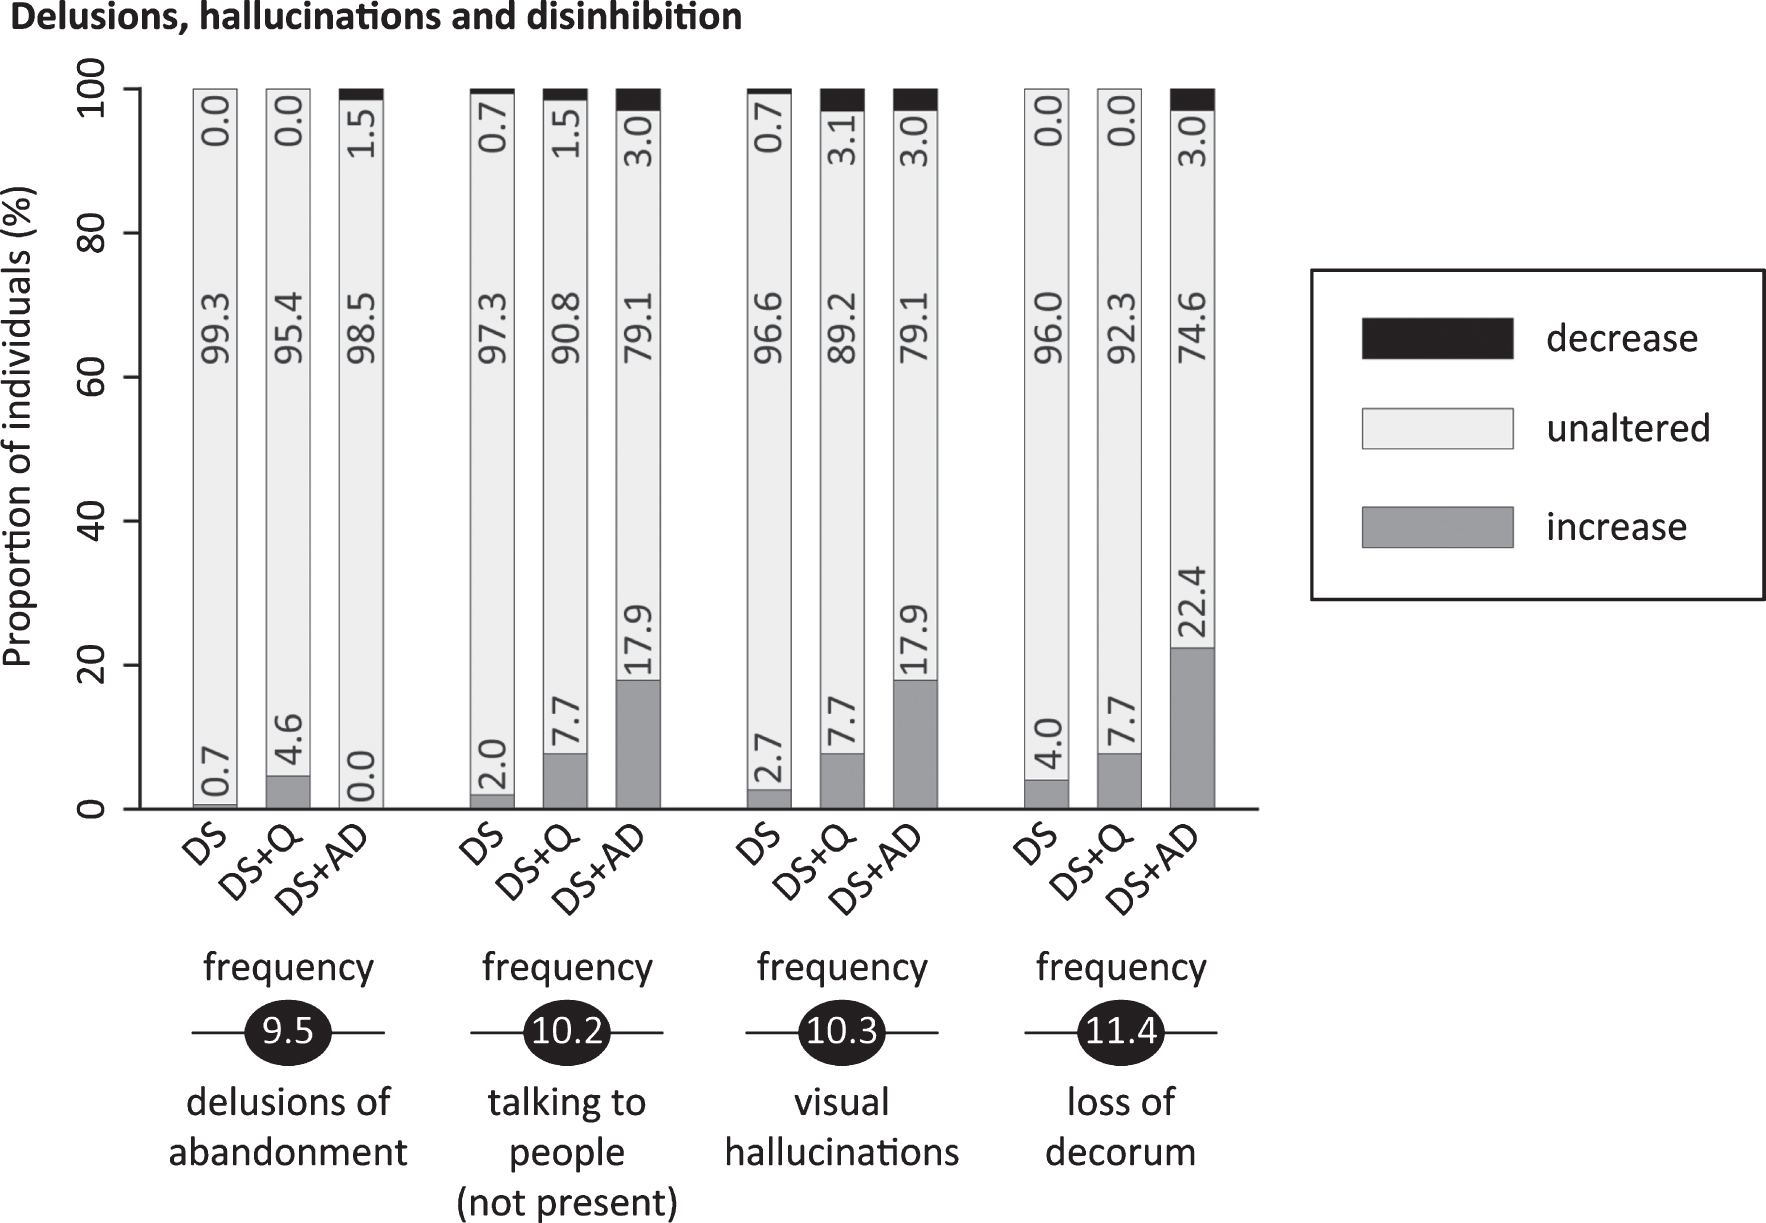 Significant frequency changes and severity changes for items in sections 9 (delusions), 10 (hallucinations) and 11 (disinhibition & sexual behavior). The proportion of individuals showing decreased, unaltered or increased scores is depicted per study group. Specifically, the black sections and corresponding percentage (top), the pale grey sections and corresponding percentage (middle) and the grey sections and corresponding percentage (bottom) respectively indicate the proportion of each study group showing a decreased, unaltered or increased frequency/severity. Statistics (Kruskal-Wallis group comparisons) and further item descriptions, including items that did not significantly differ between groups, are provided in the text. DS, Down syndrome without signs of dementia; DS+Q, Down syndrome with questionable dementia; DS+AD, Down syndrome with diagnosed AD.